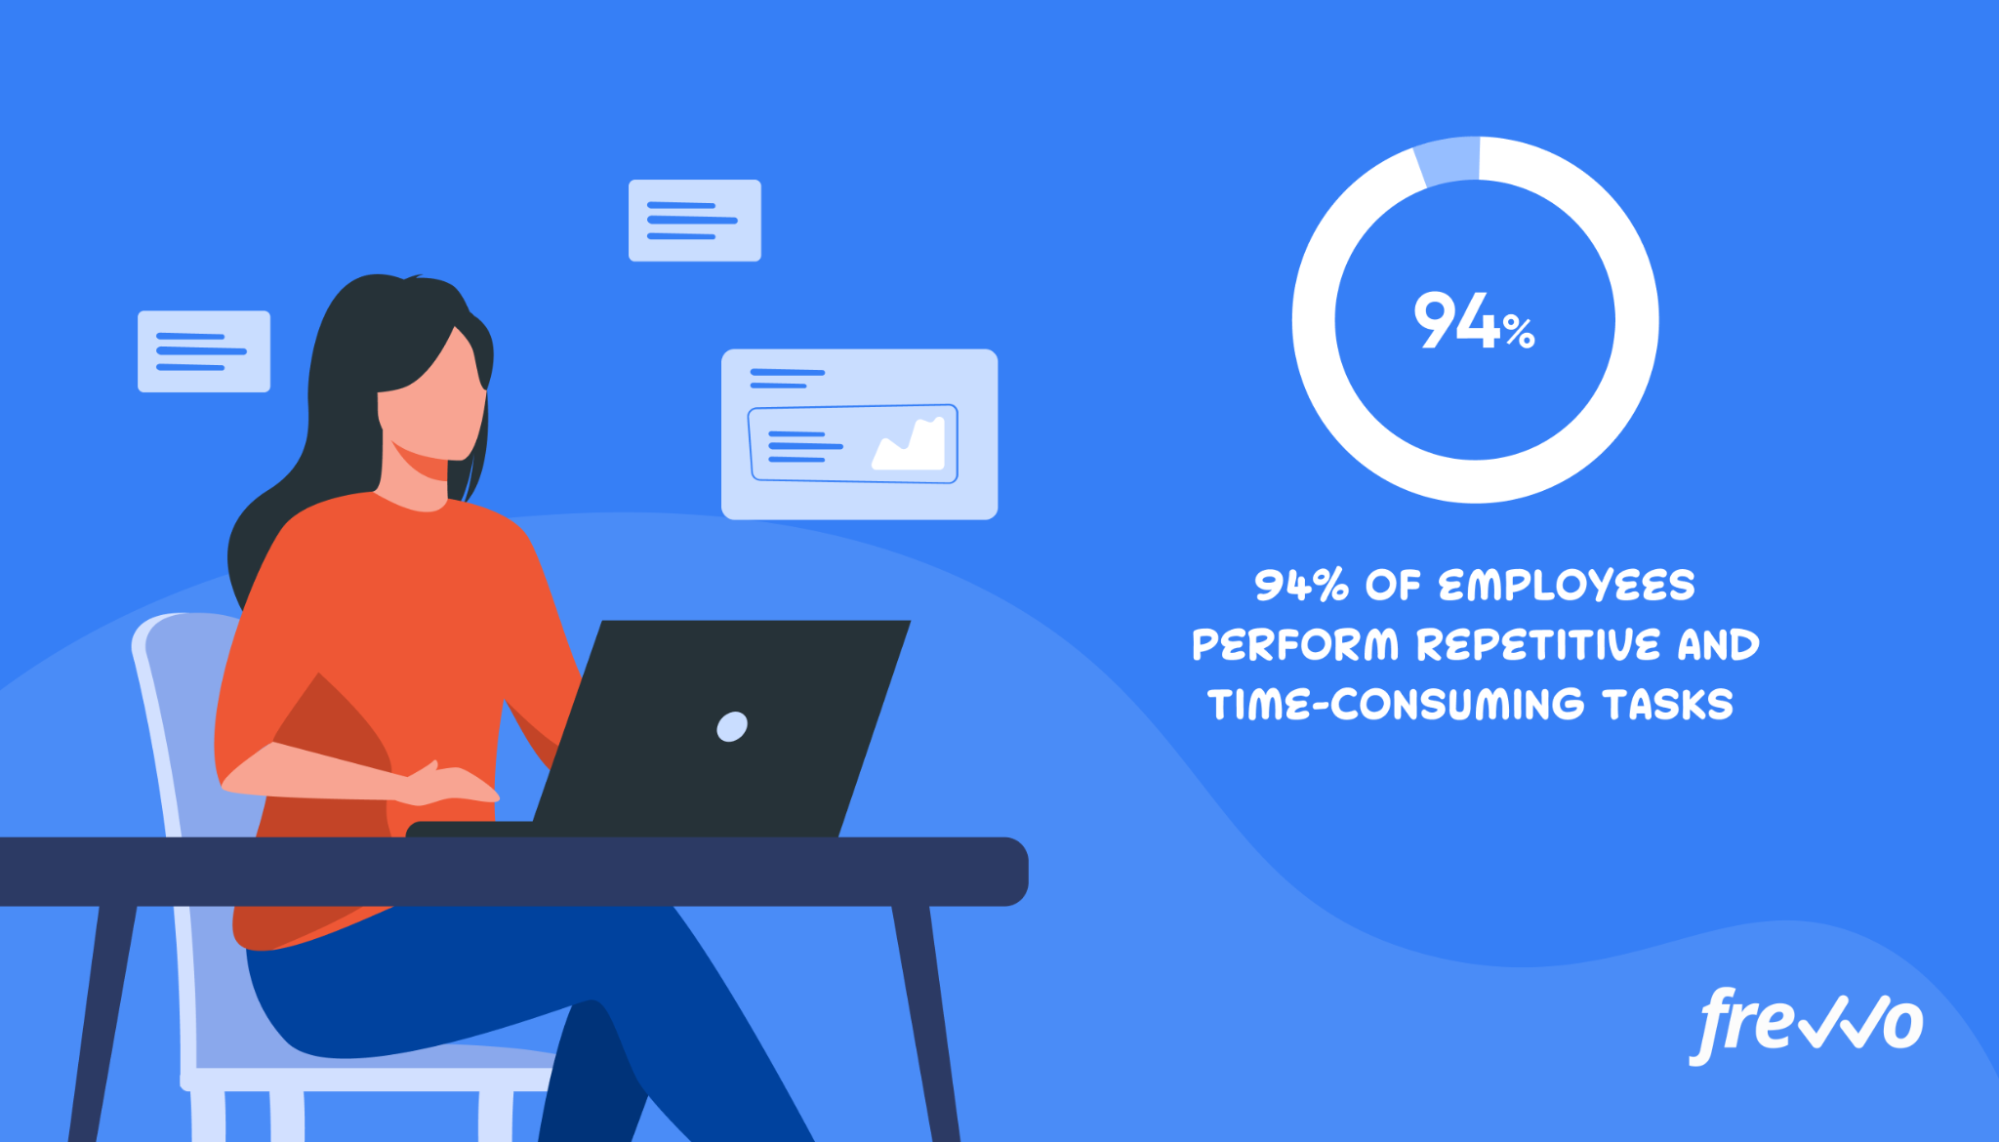 94% of employees perform repetitive and time-consuming tasks